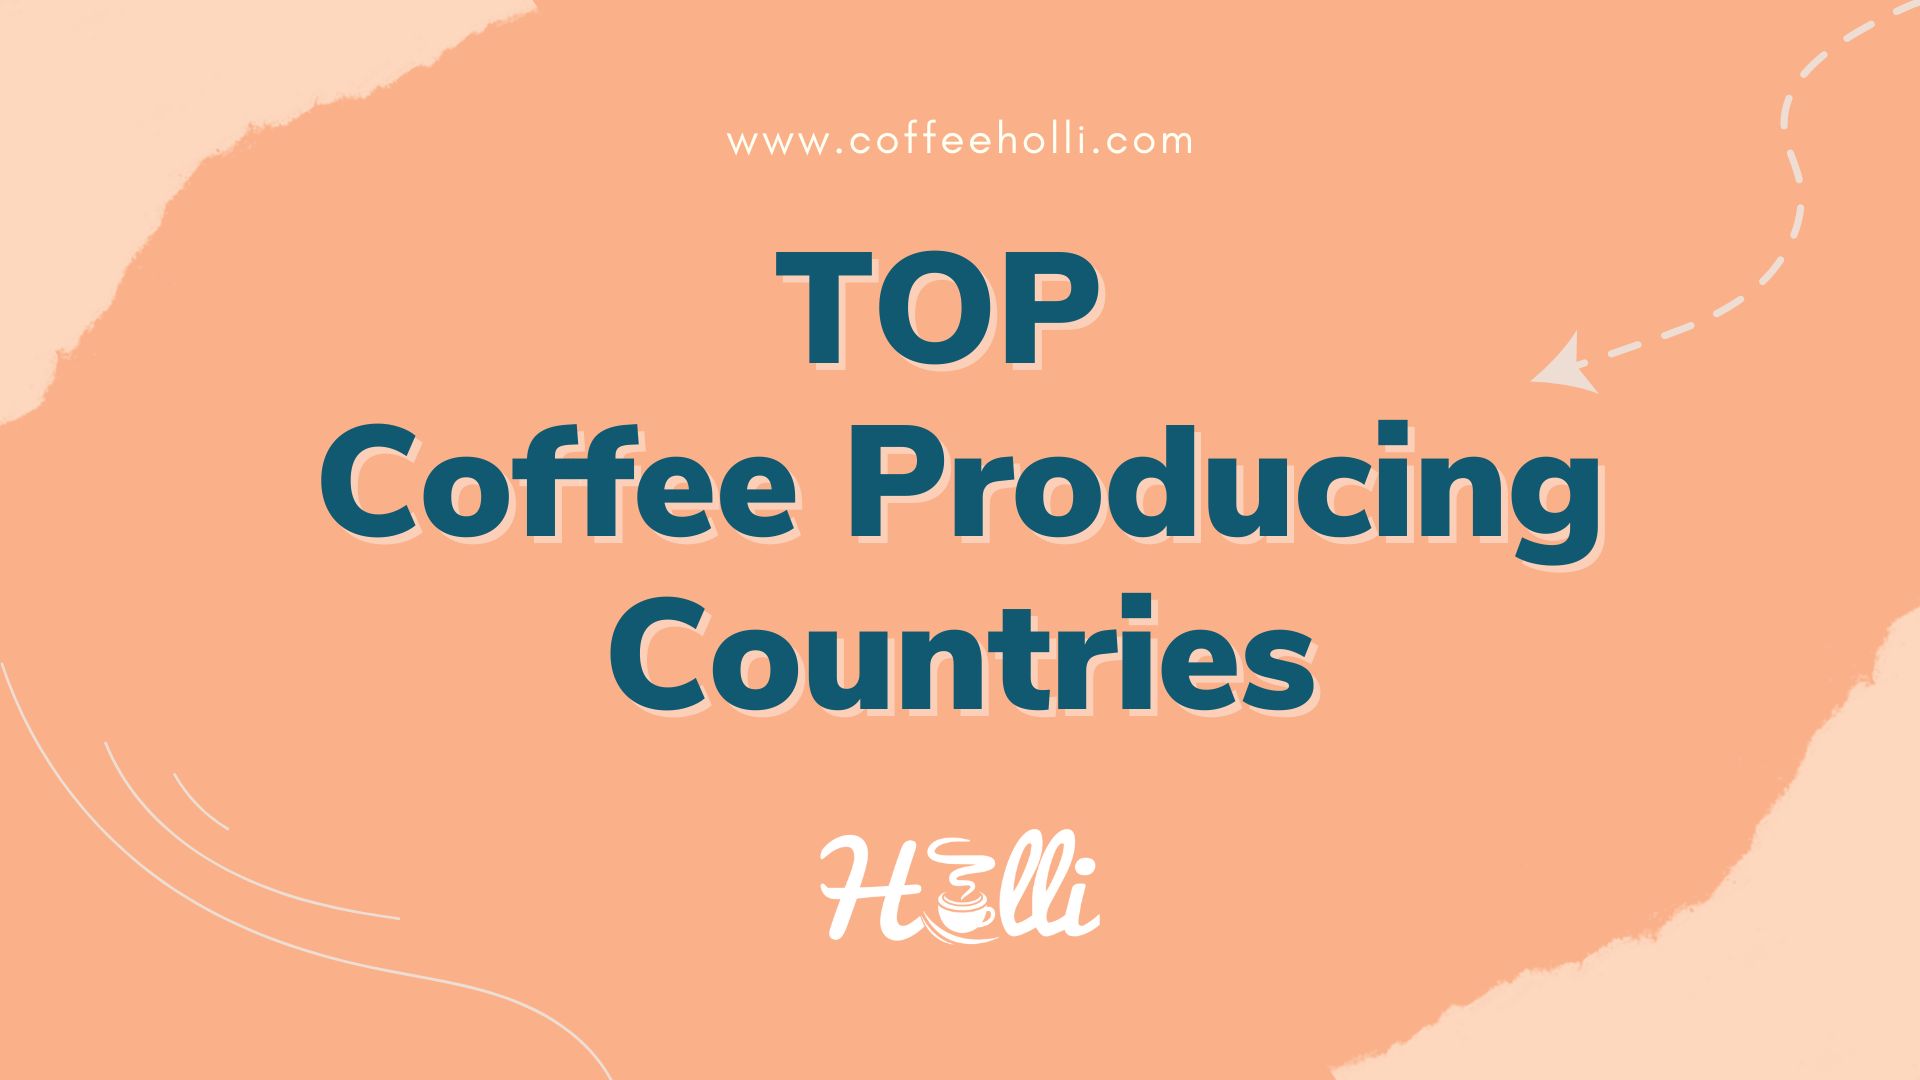 Top Coffee Producing Countries